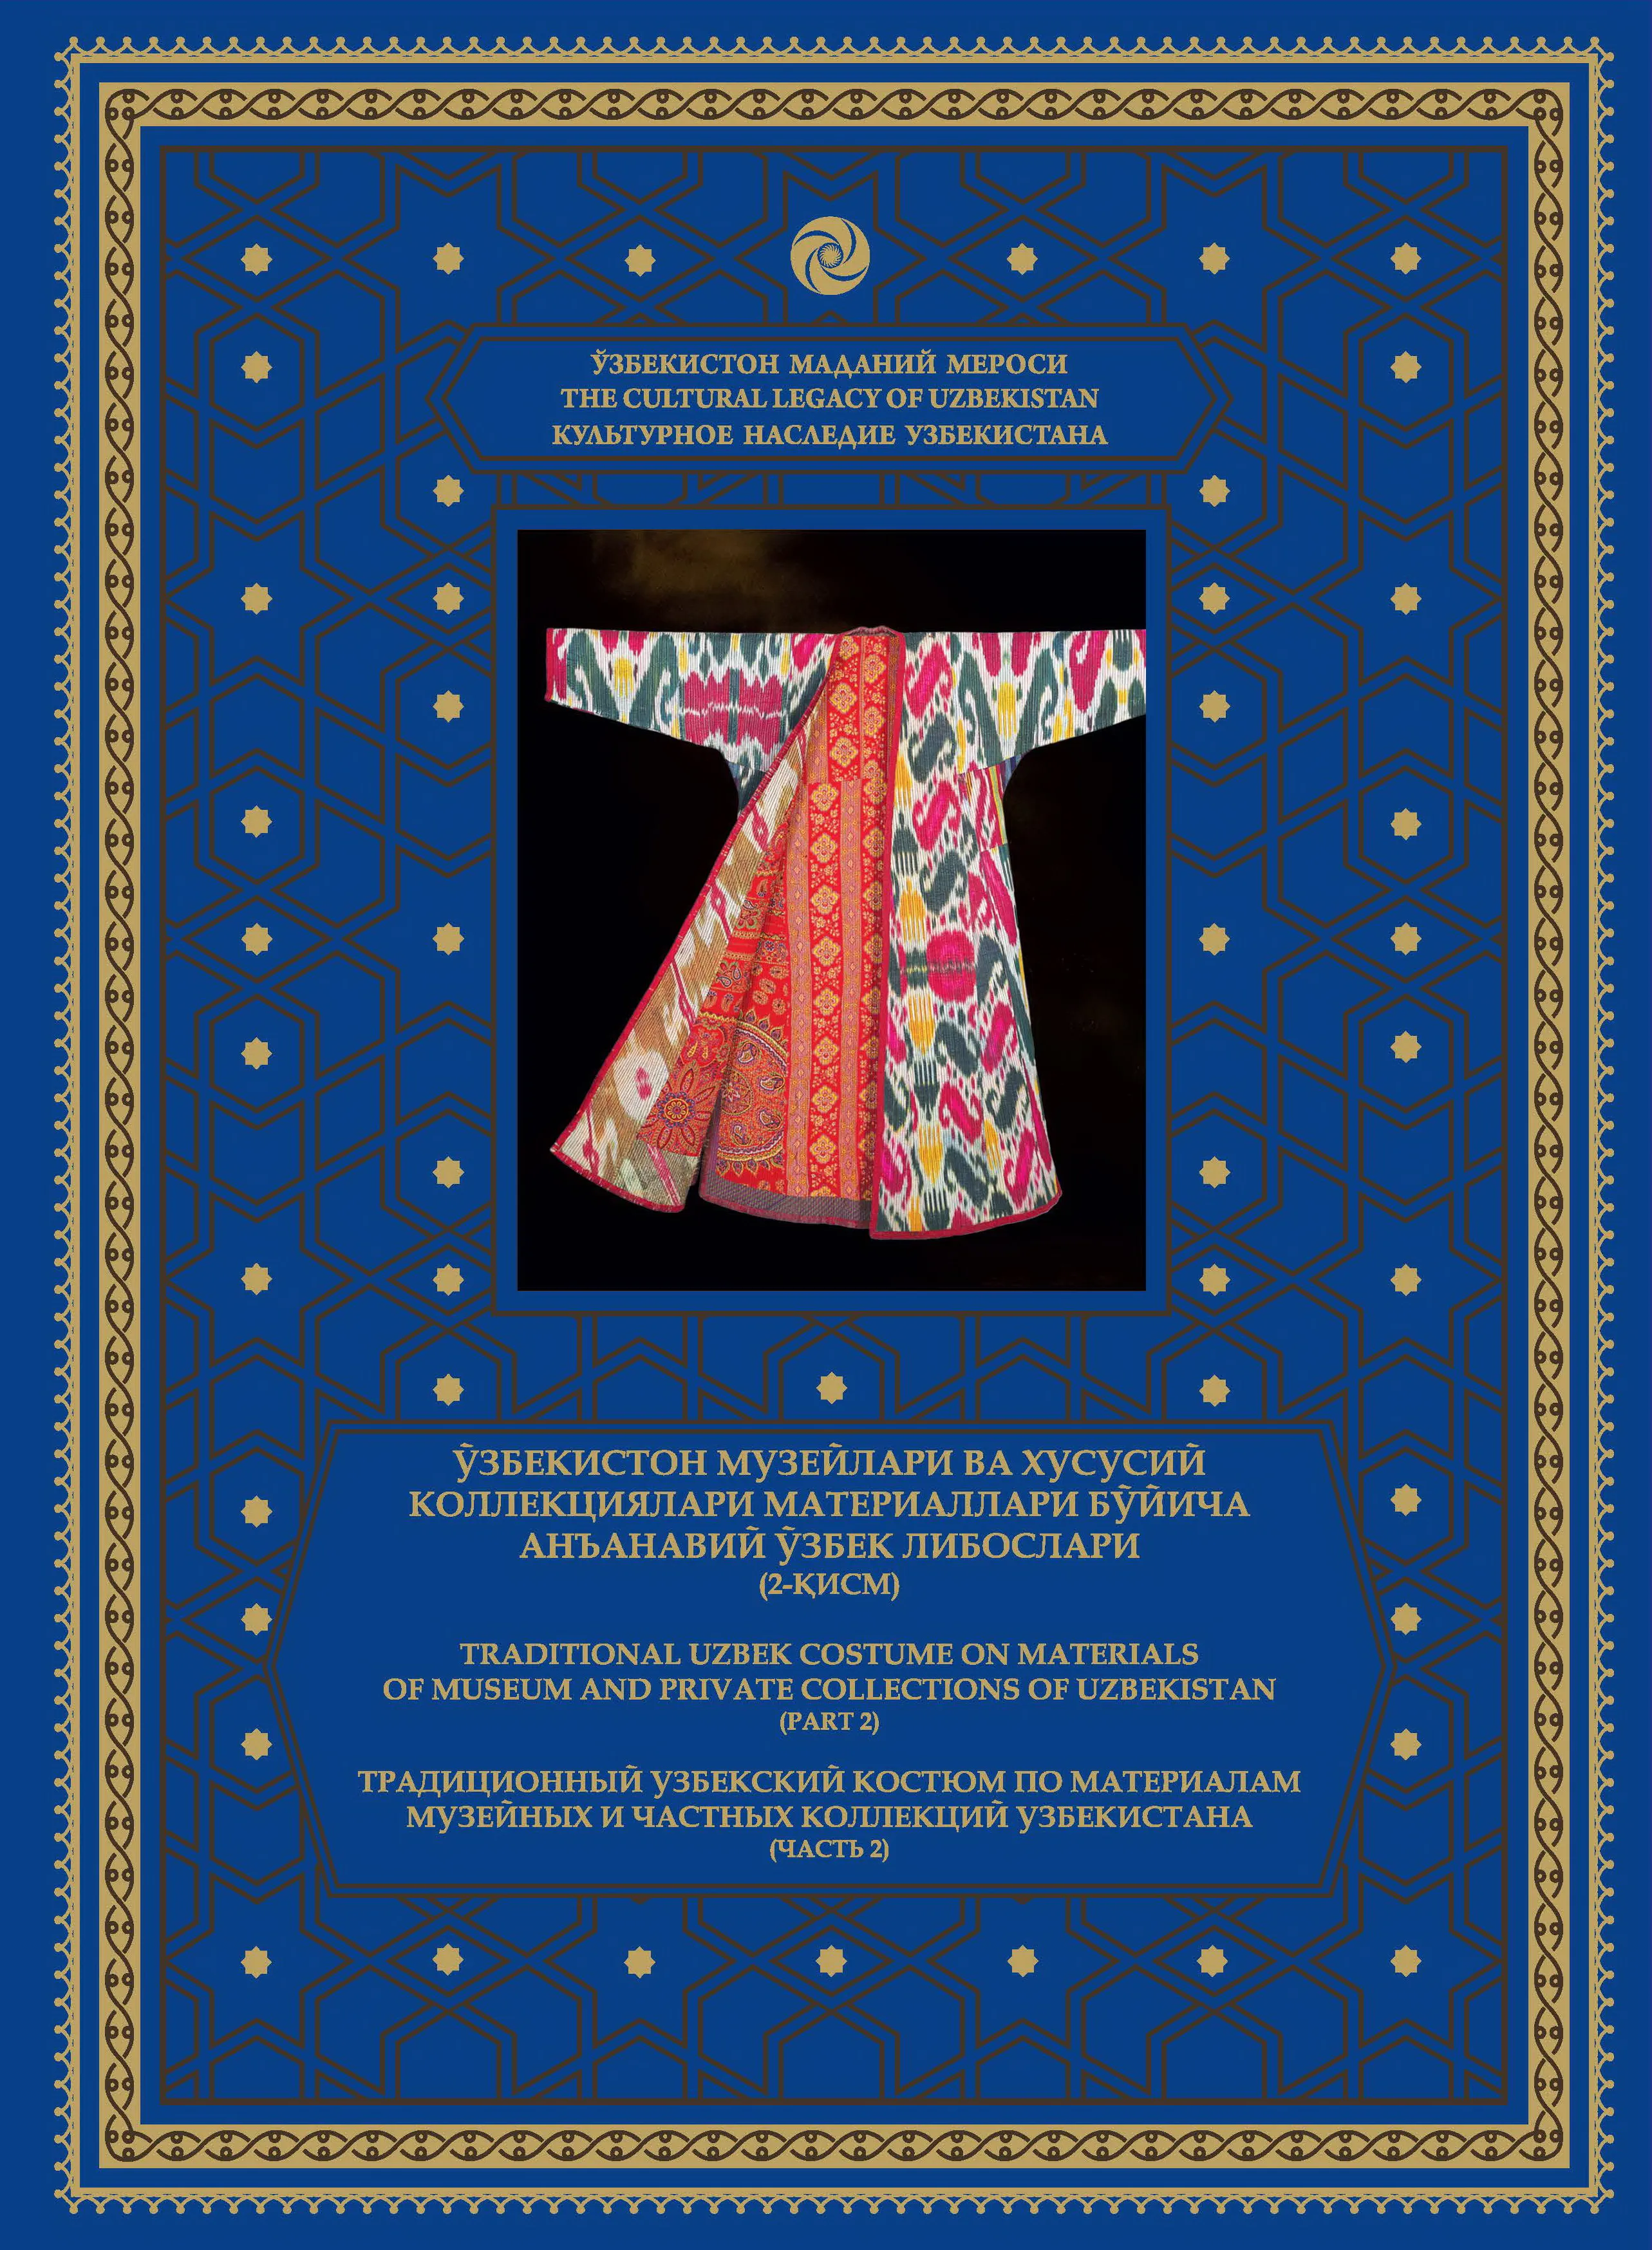 TRADITIONAL UZBEK COSTUME ON THE MATERIALS OF MUSEUM AND PRIVATE COLLECTIONS OF UZBEKISTAN (PART 2)